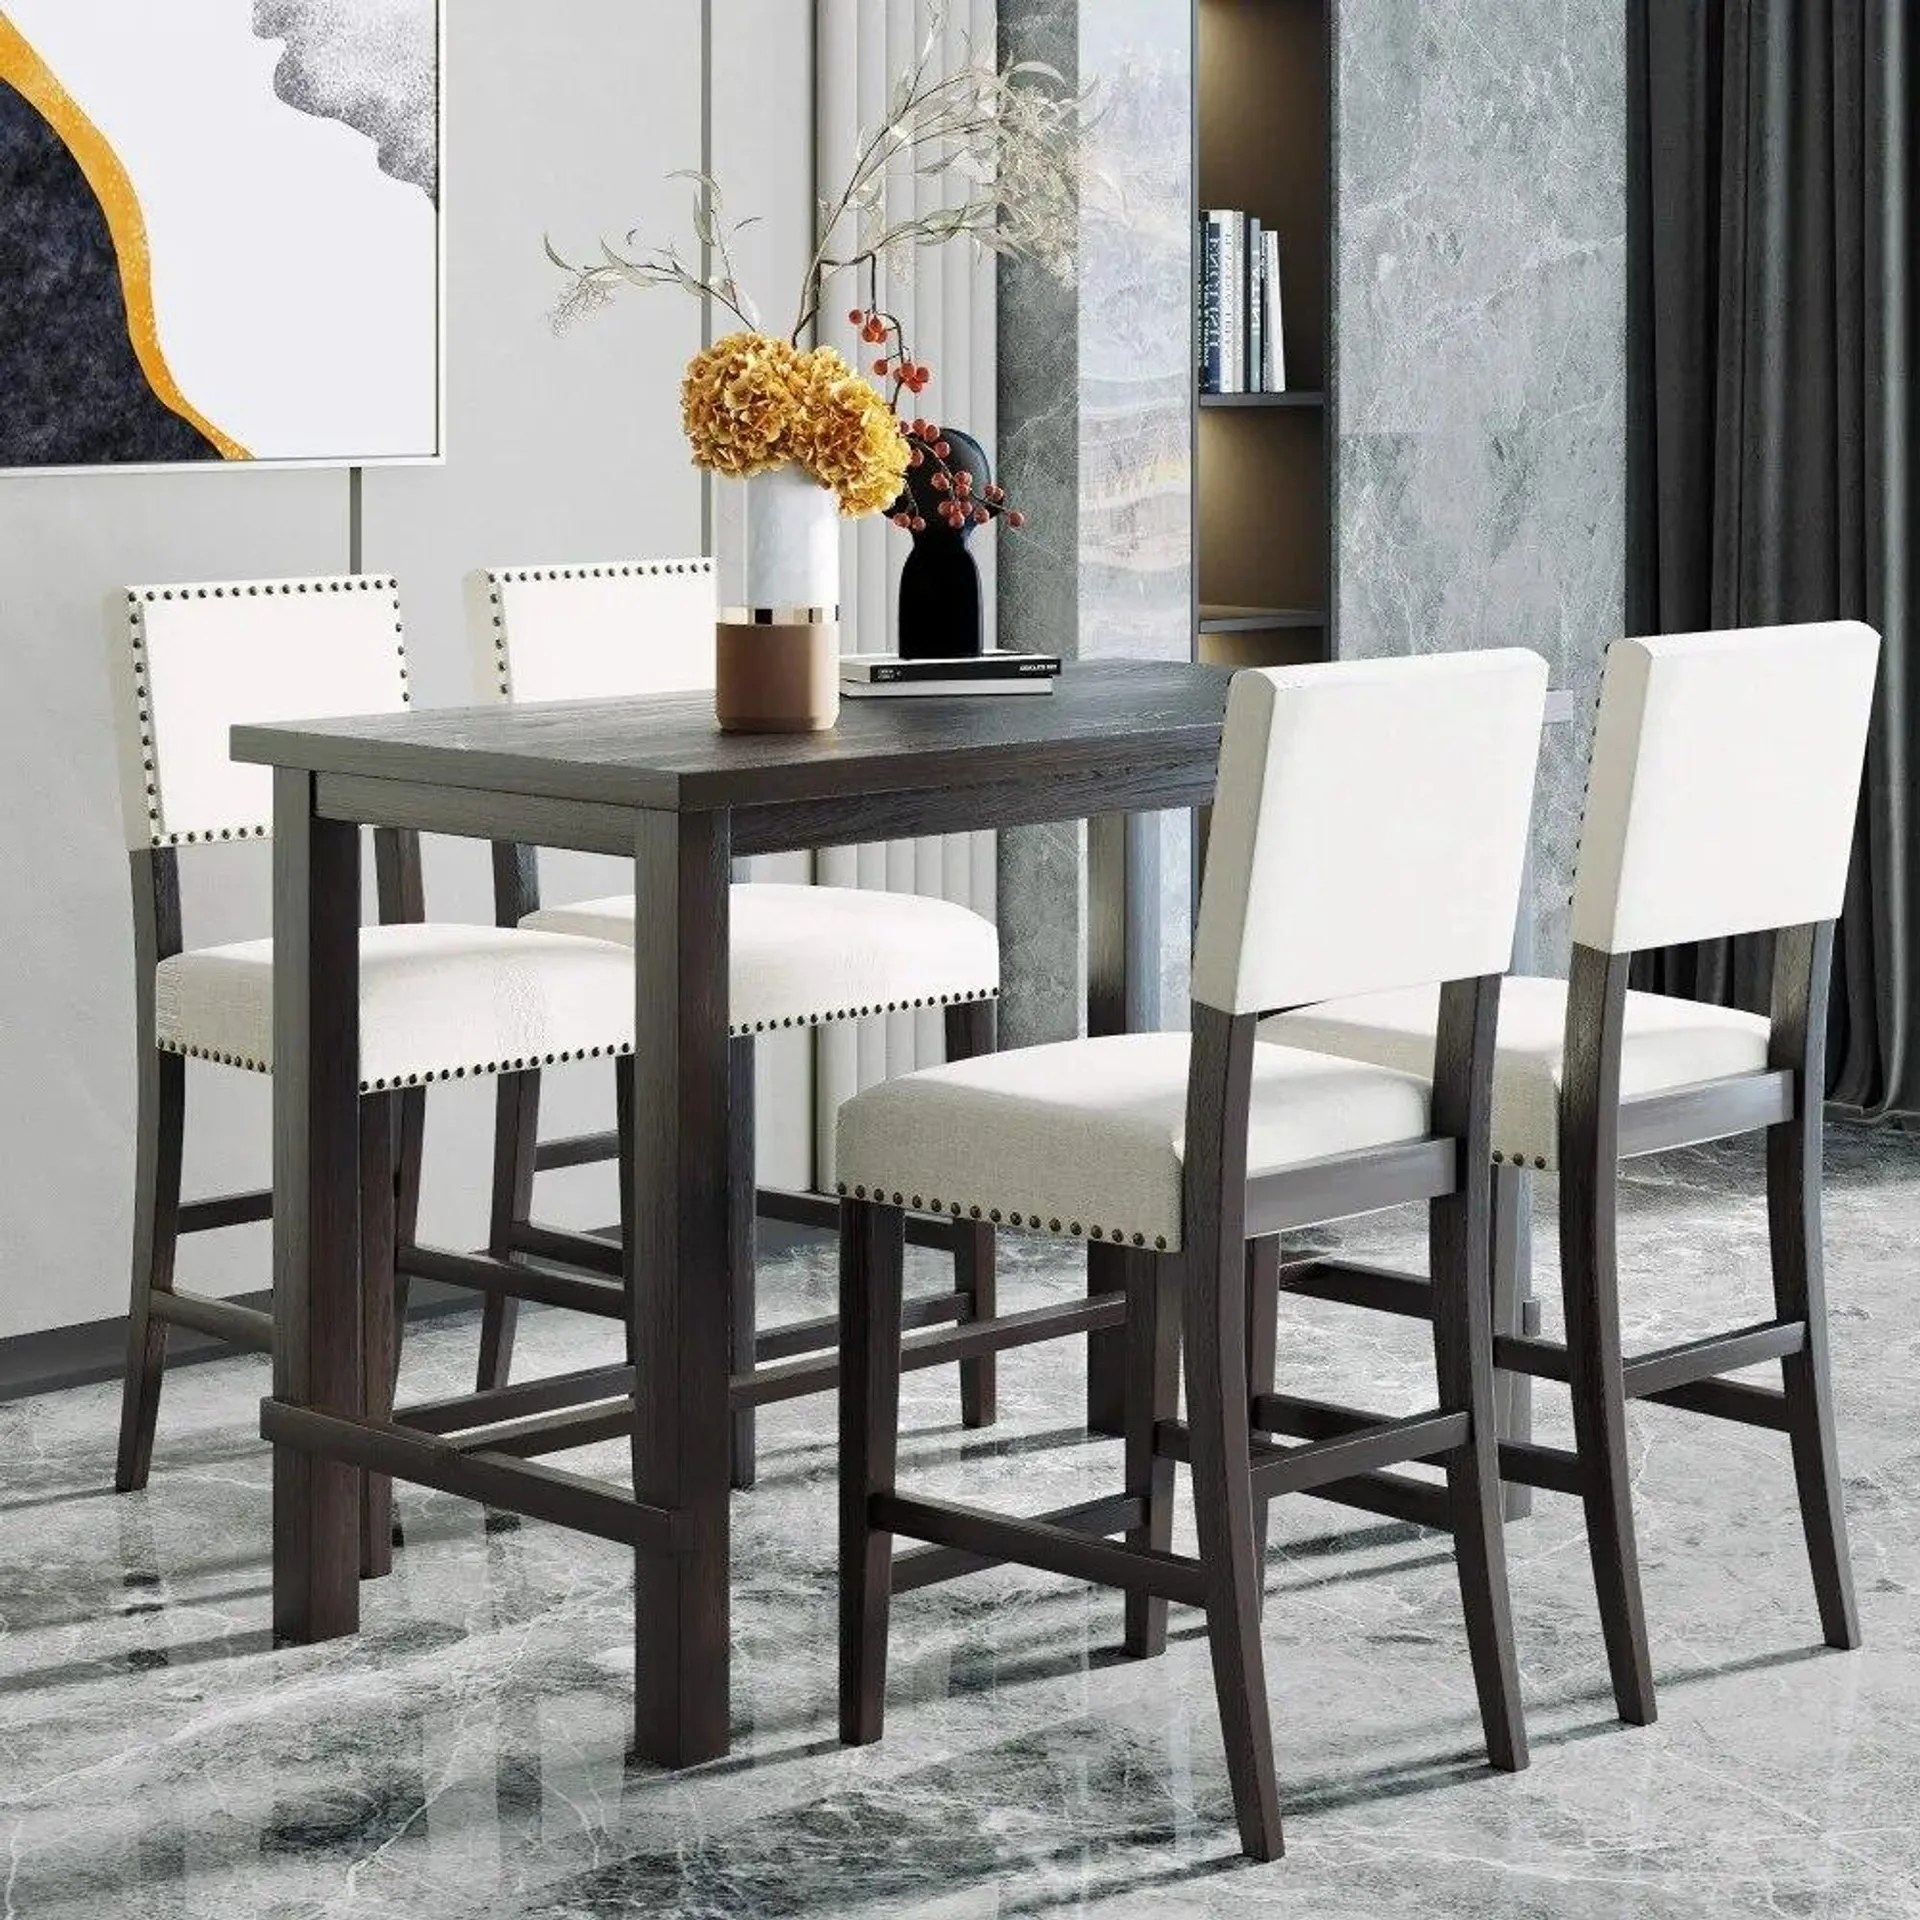 2024 New 5-Piece Wooden Counter Height Dining Table Set with 4 Padded Chairs with Nailhead Trim, Espresso + Beige